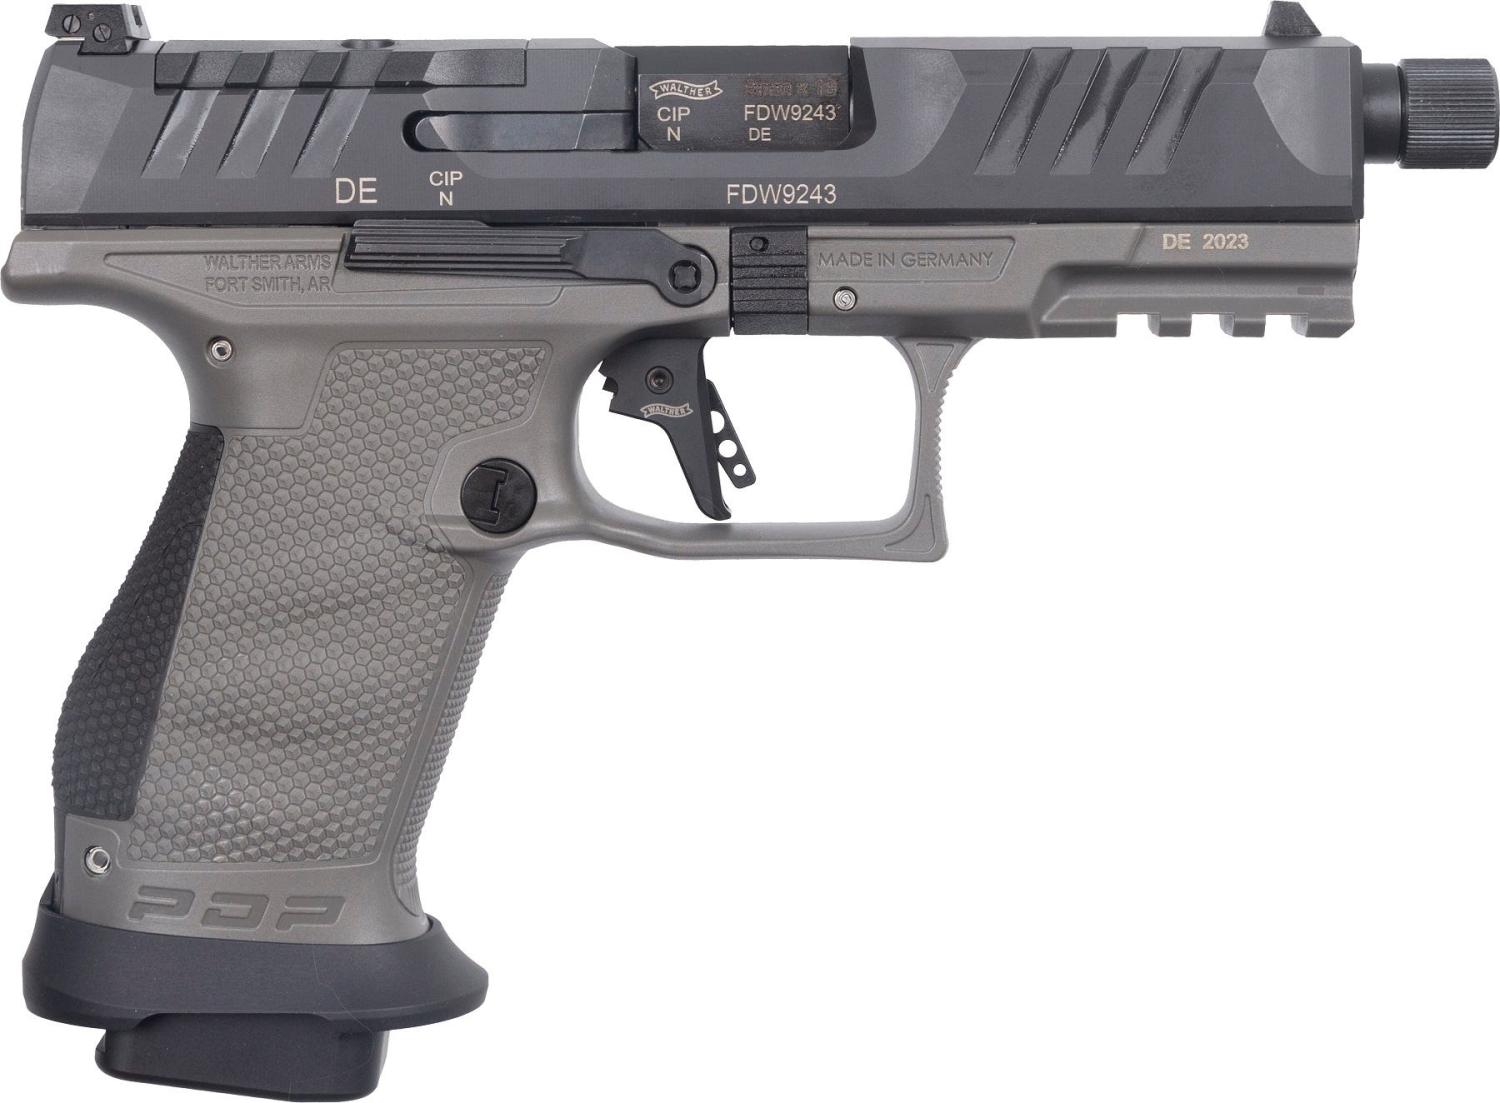 Walther PDP Pro SD Compact Grey 9mm 4.6" Barrel 18-Rounds 3 Mags - $699.99 (E-Mail Price)